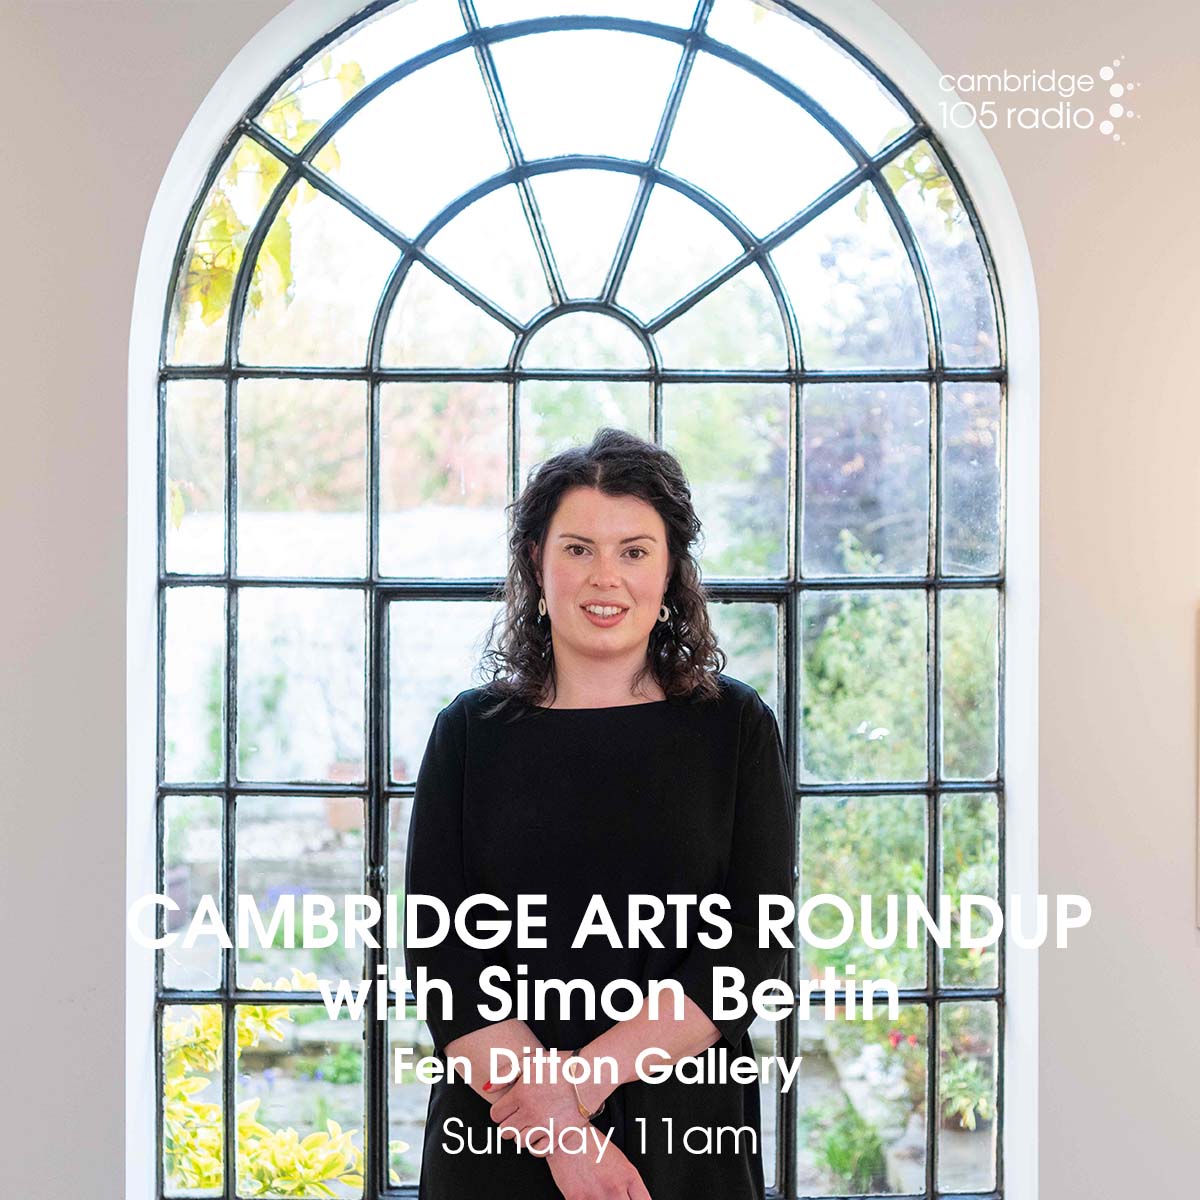 On Cambridge Arts Roundup with Simon Bertin, @ClareCollege fellow Patricia Fara on Frankenstein and AI; @fendittongalle1’s Hannah Munby and a play with a new take on Oppenheimer with Cambridge playwright @KatherineMoar. Sunday at 11 FM//Digital//Online//Smart Speaker.